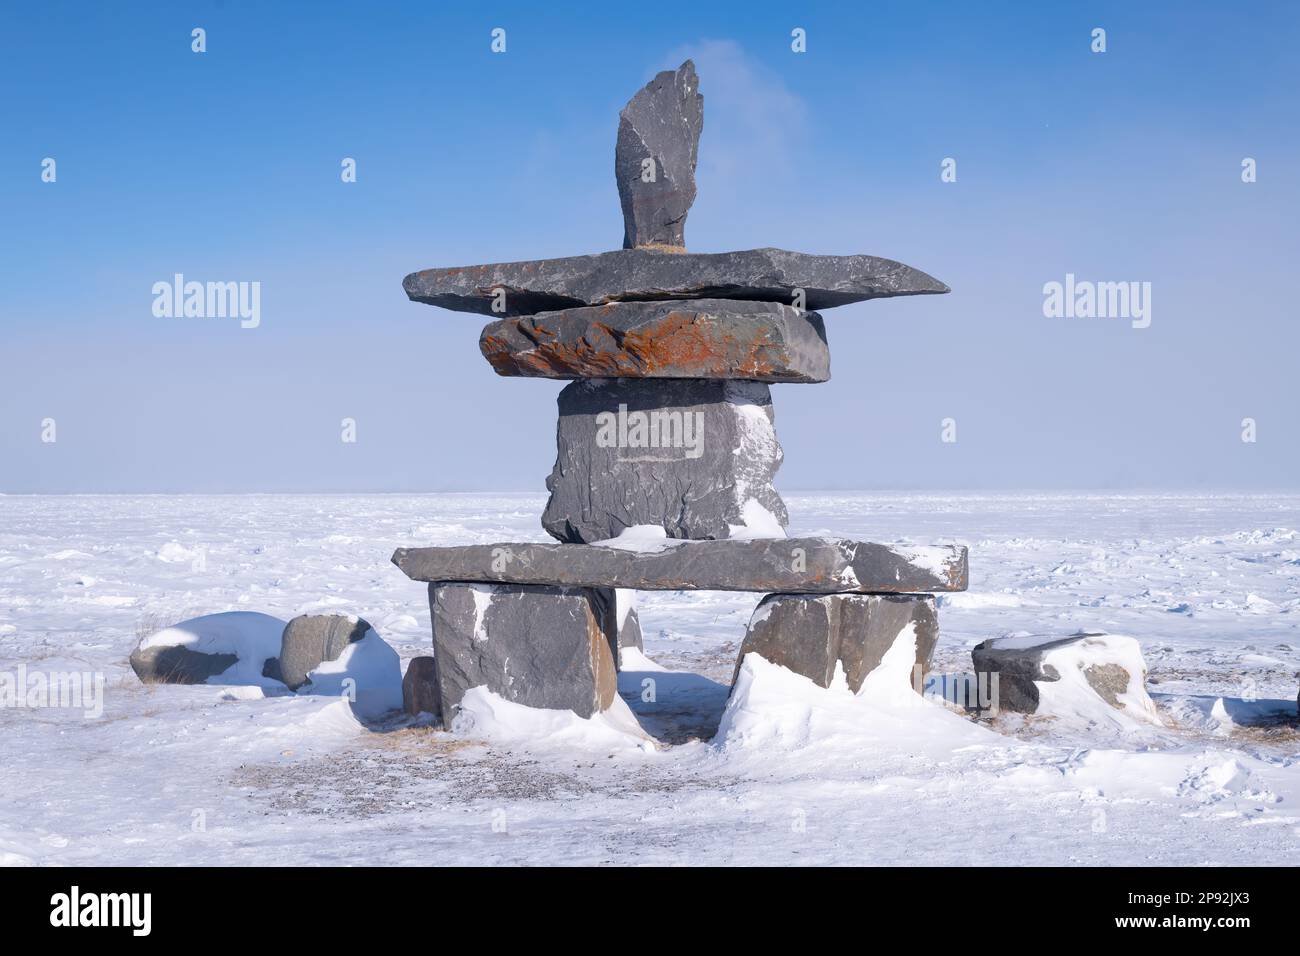 An Inukshuk (standing stones markers erected by First Nations people) on the shore of the Hudson Bay in Churchill, Manitoba, Canada. Stock Photo